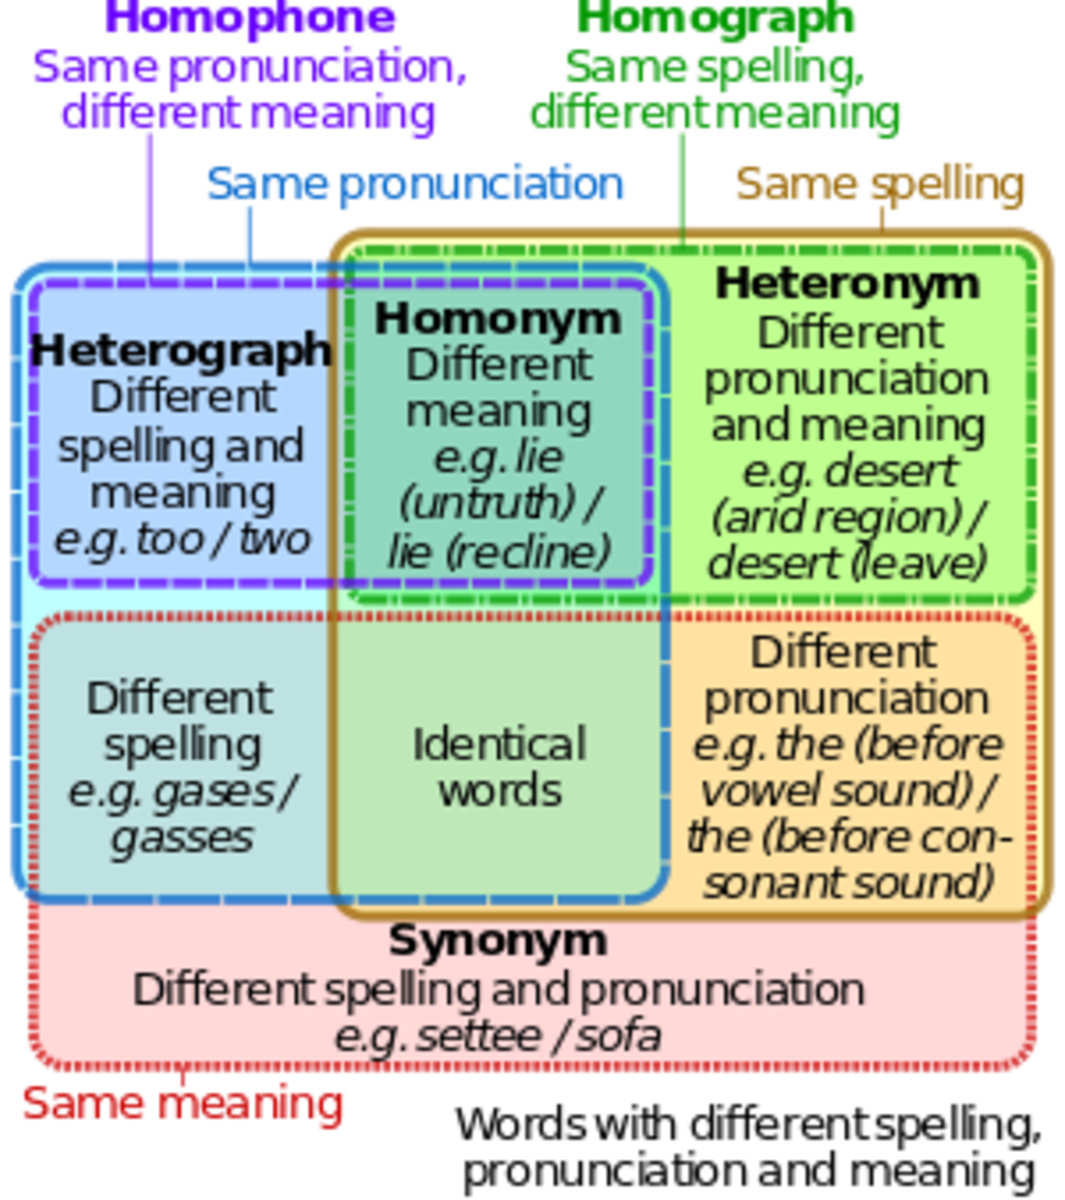 lexical-relations-describing-similarities-in-the-english-language